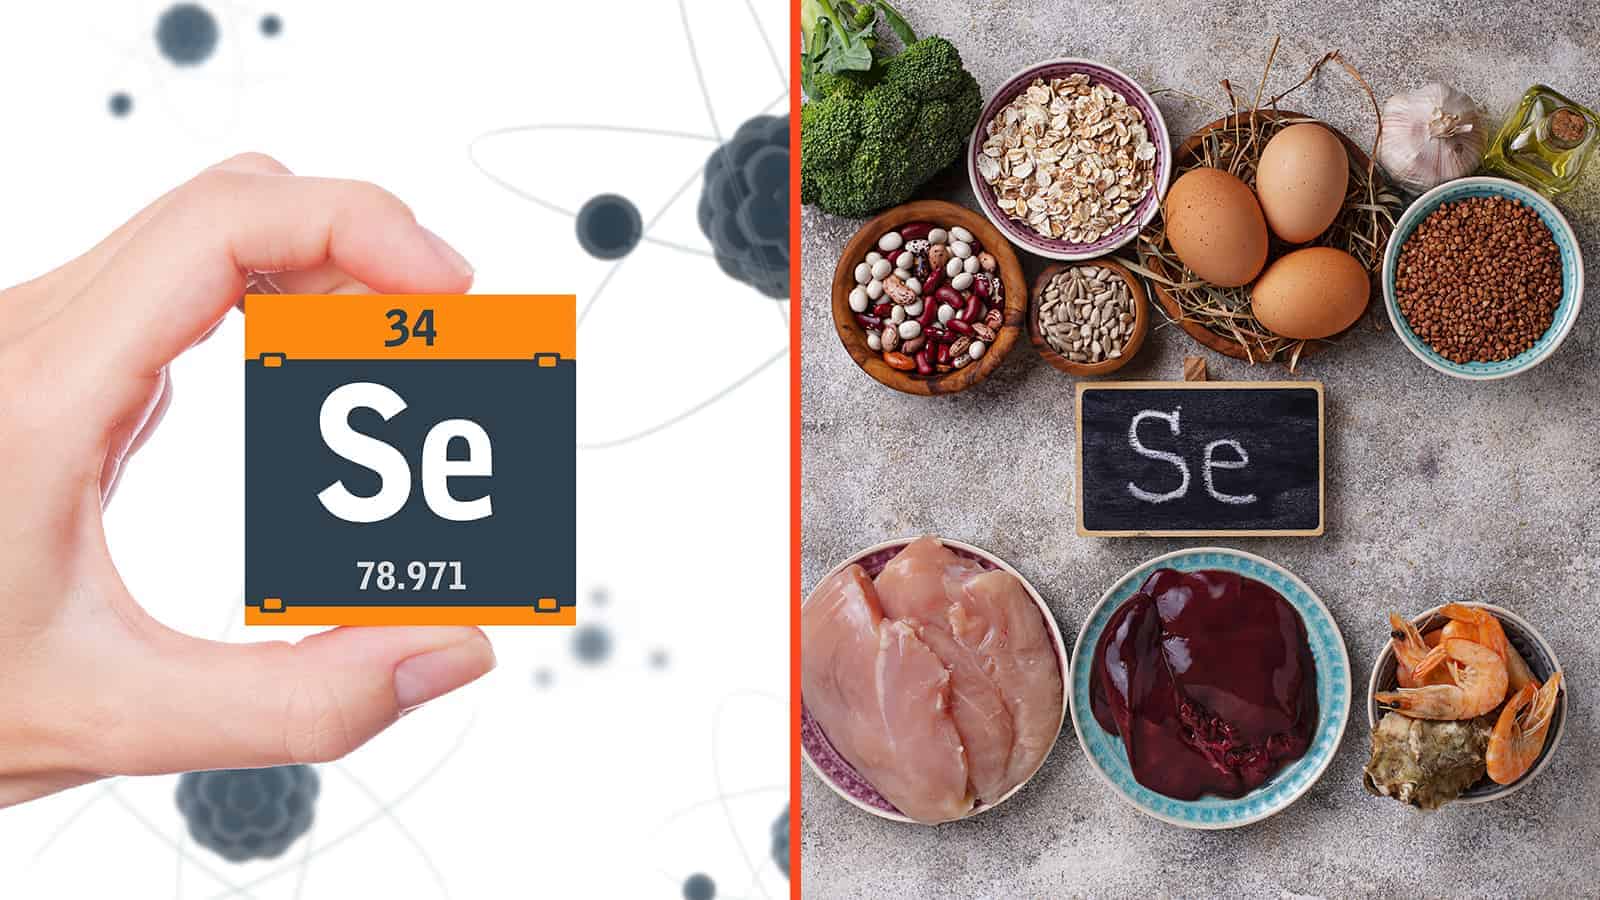 According to science, how selenium can extend lifespan